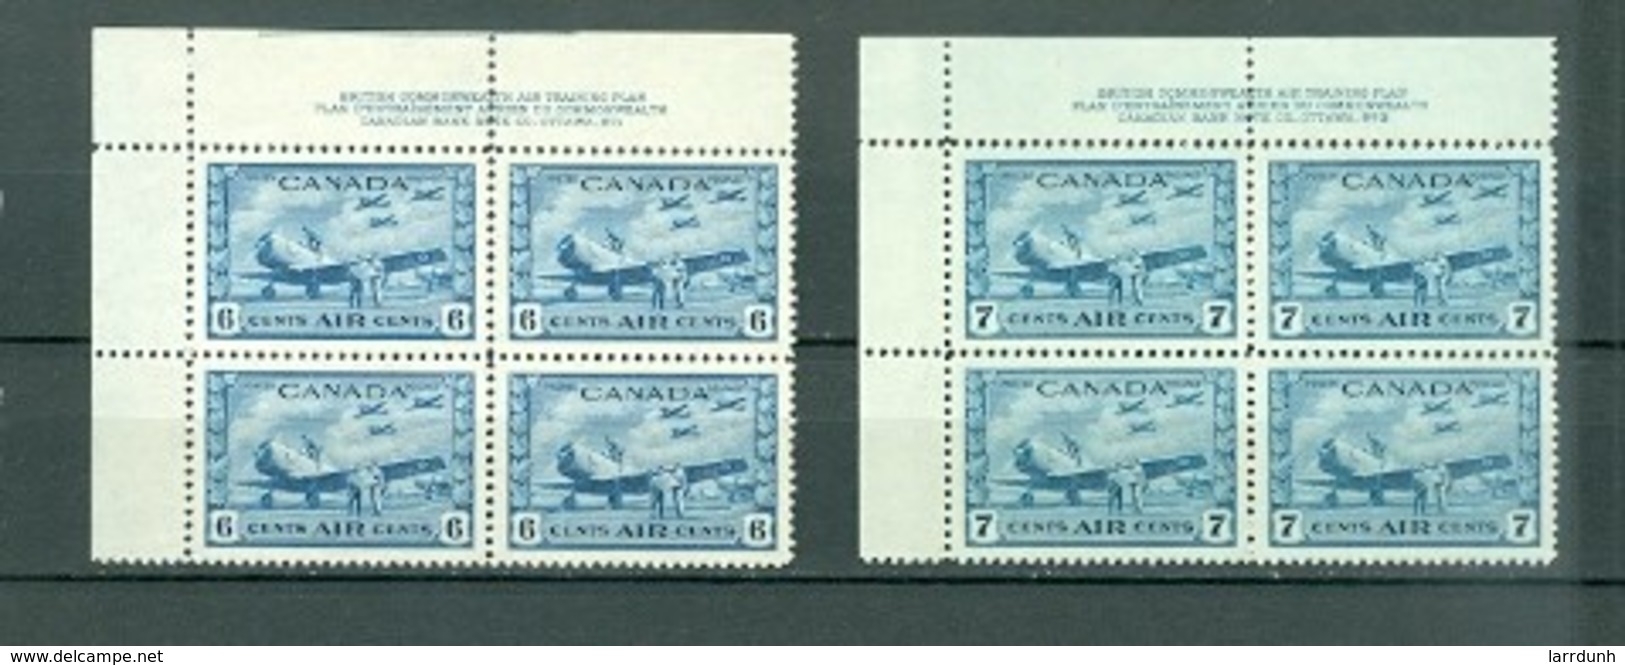 Canada C7 C8 Planes And Student Flyers British Commonwealth Air Training Plan Plate Block UL MNH 1942 1943 A04s - Airmail: Special Delivery